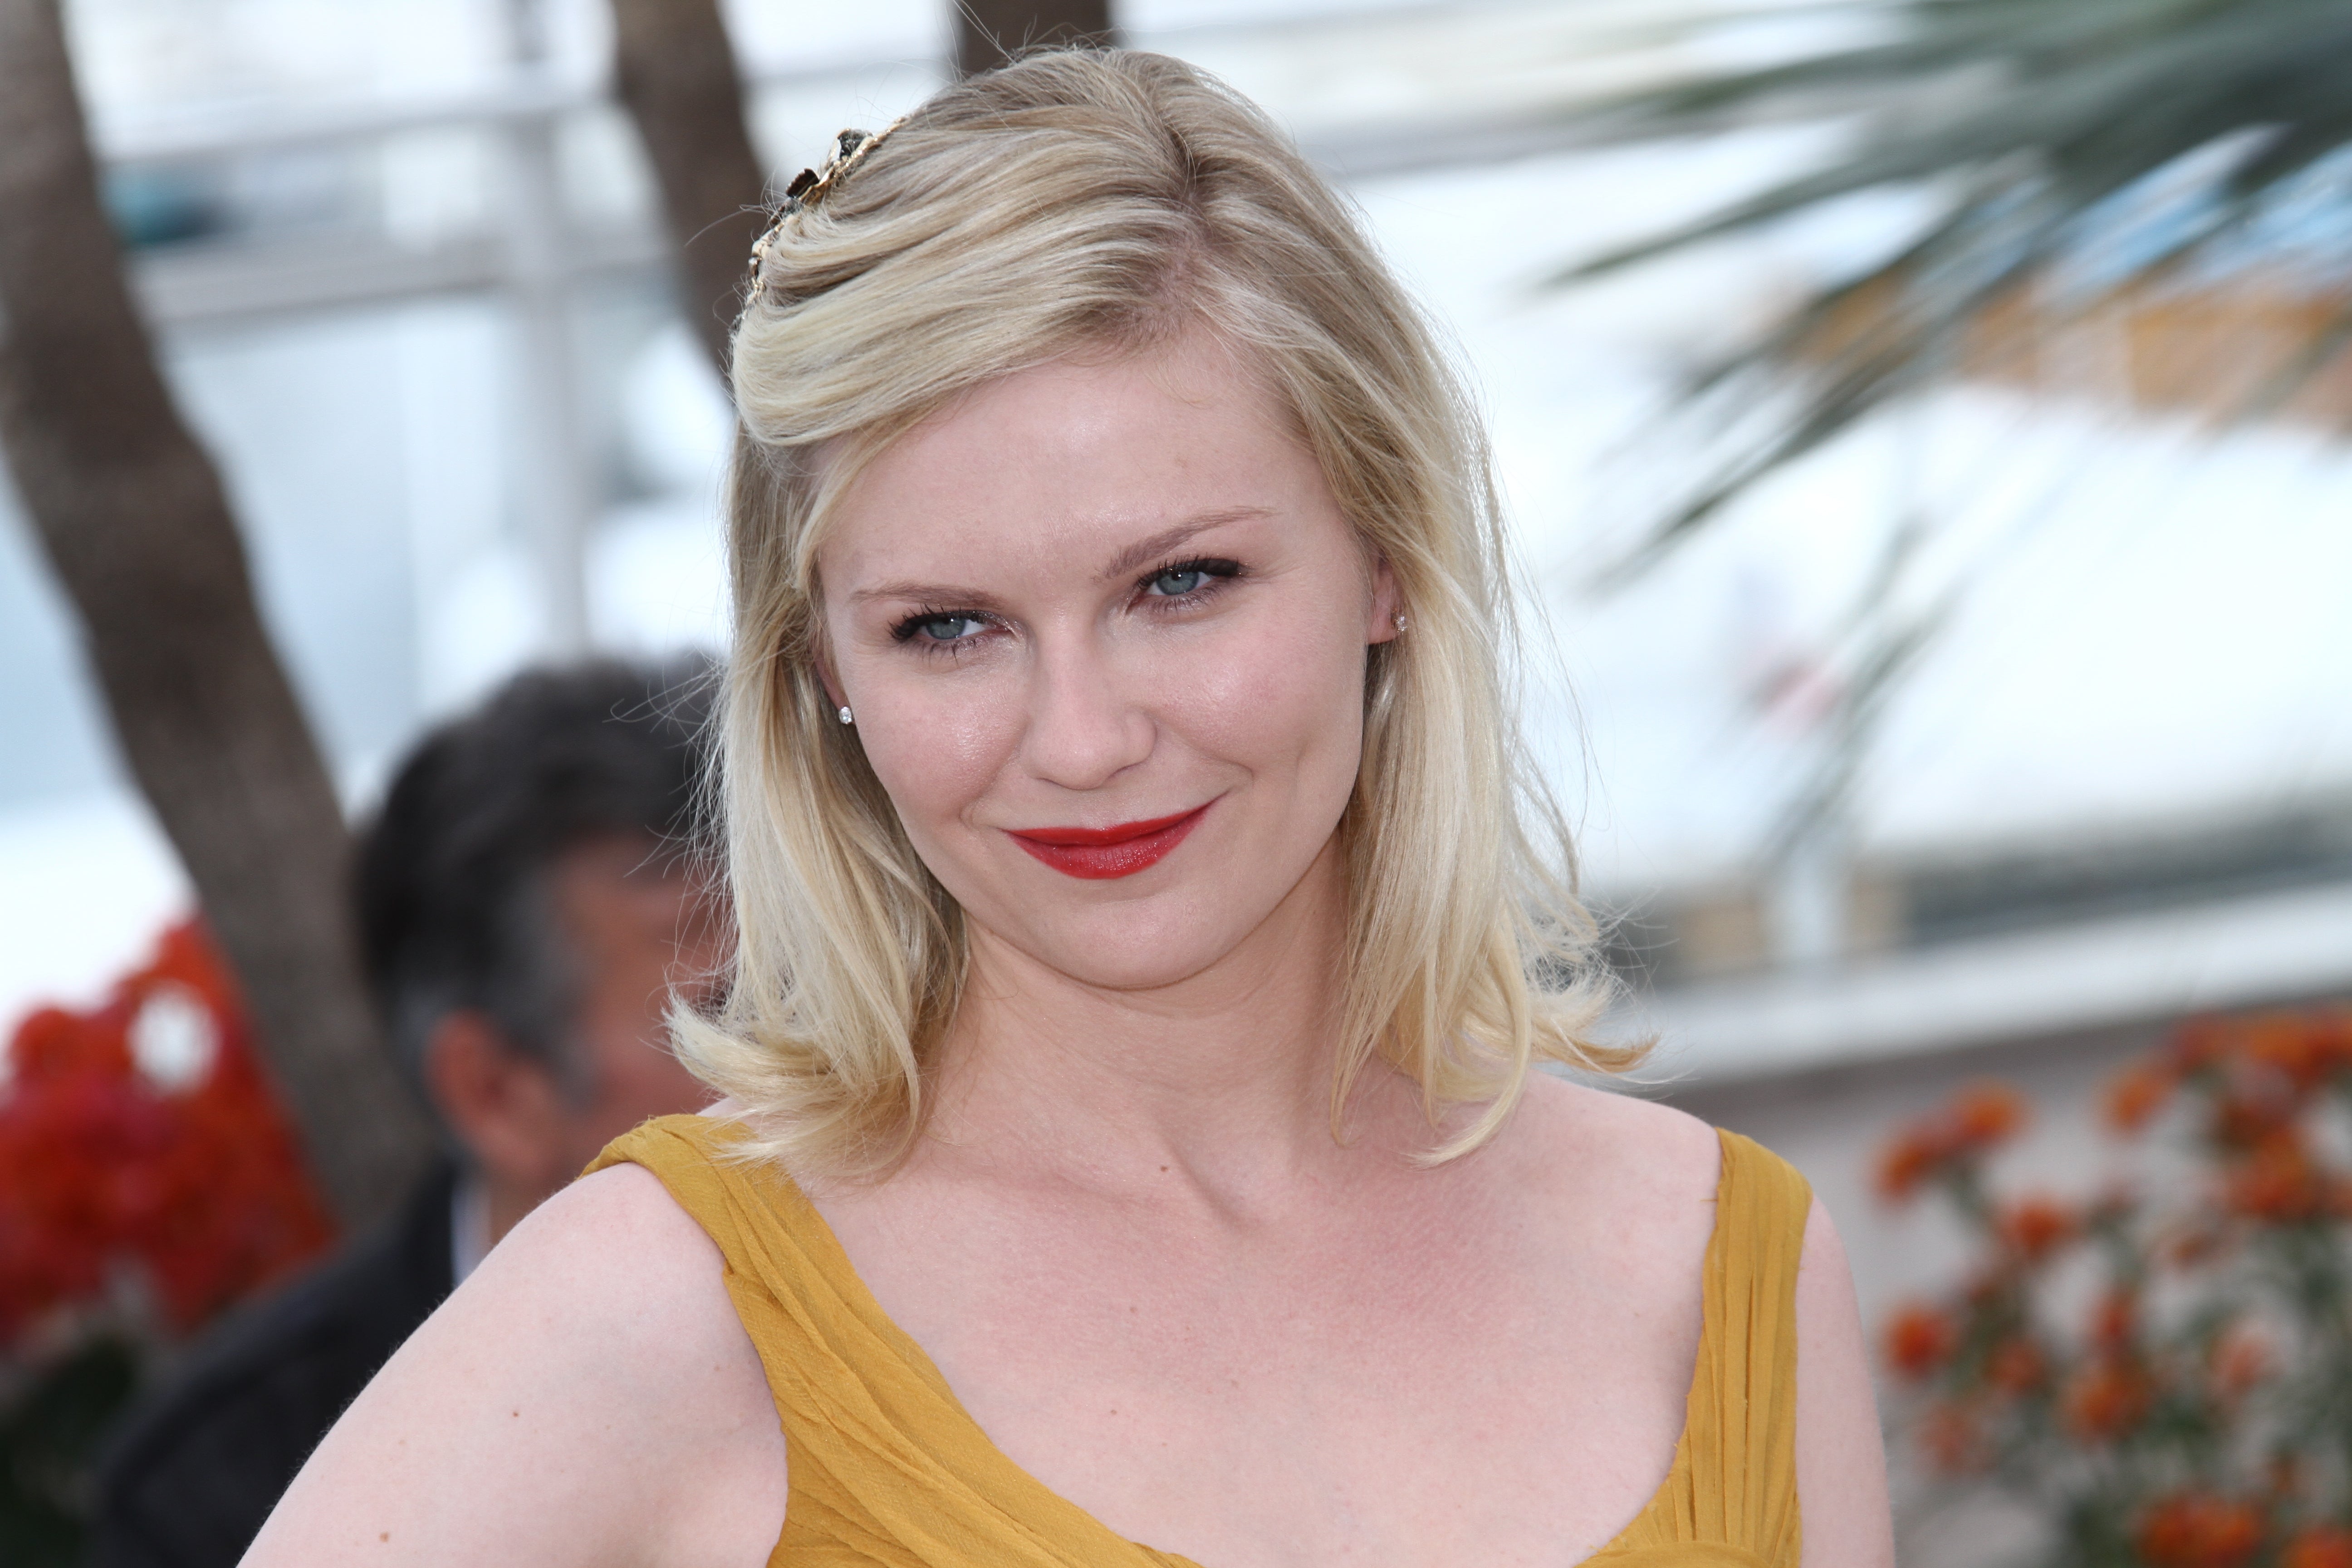 Kirsten Dunst, a cannabis flower-loving celebrity, wears a mustard colored dress and smiles at the camera.